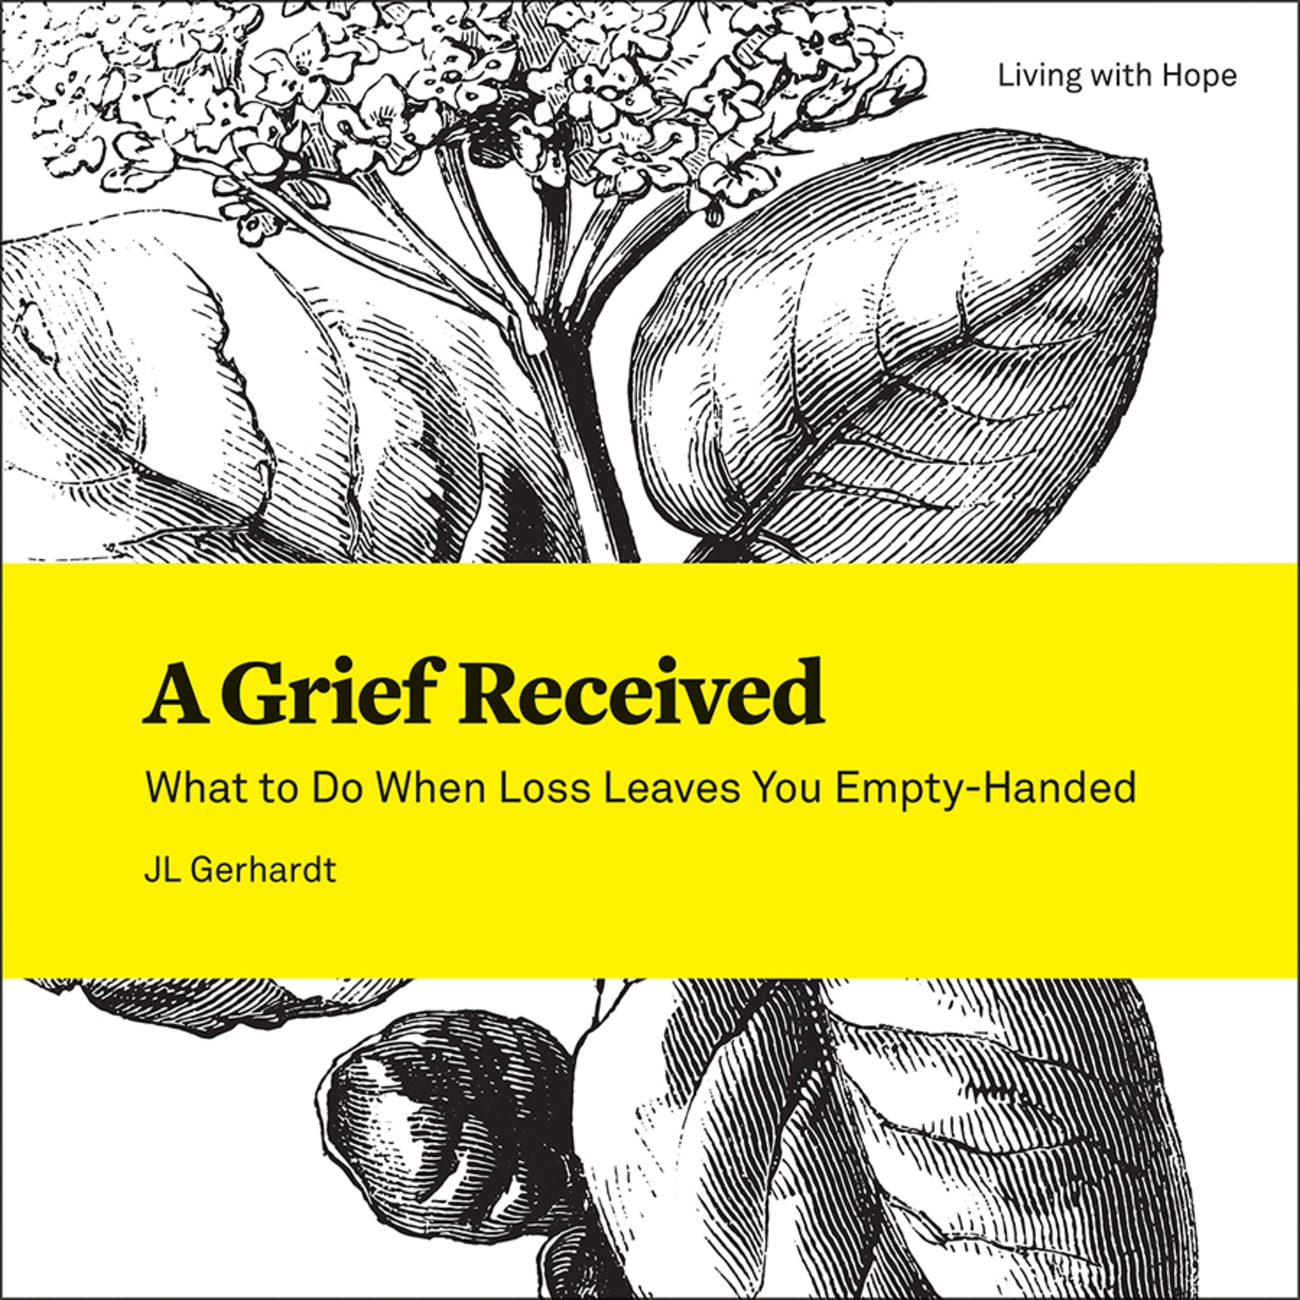 Grief Received, A: What to Do When Loss Leaves You Empty-Handed (Living With Hope Series) Paperback